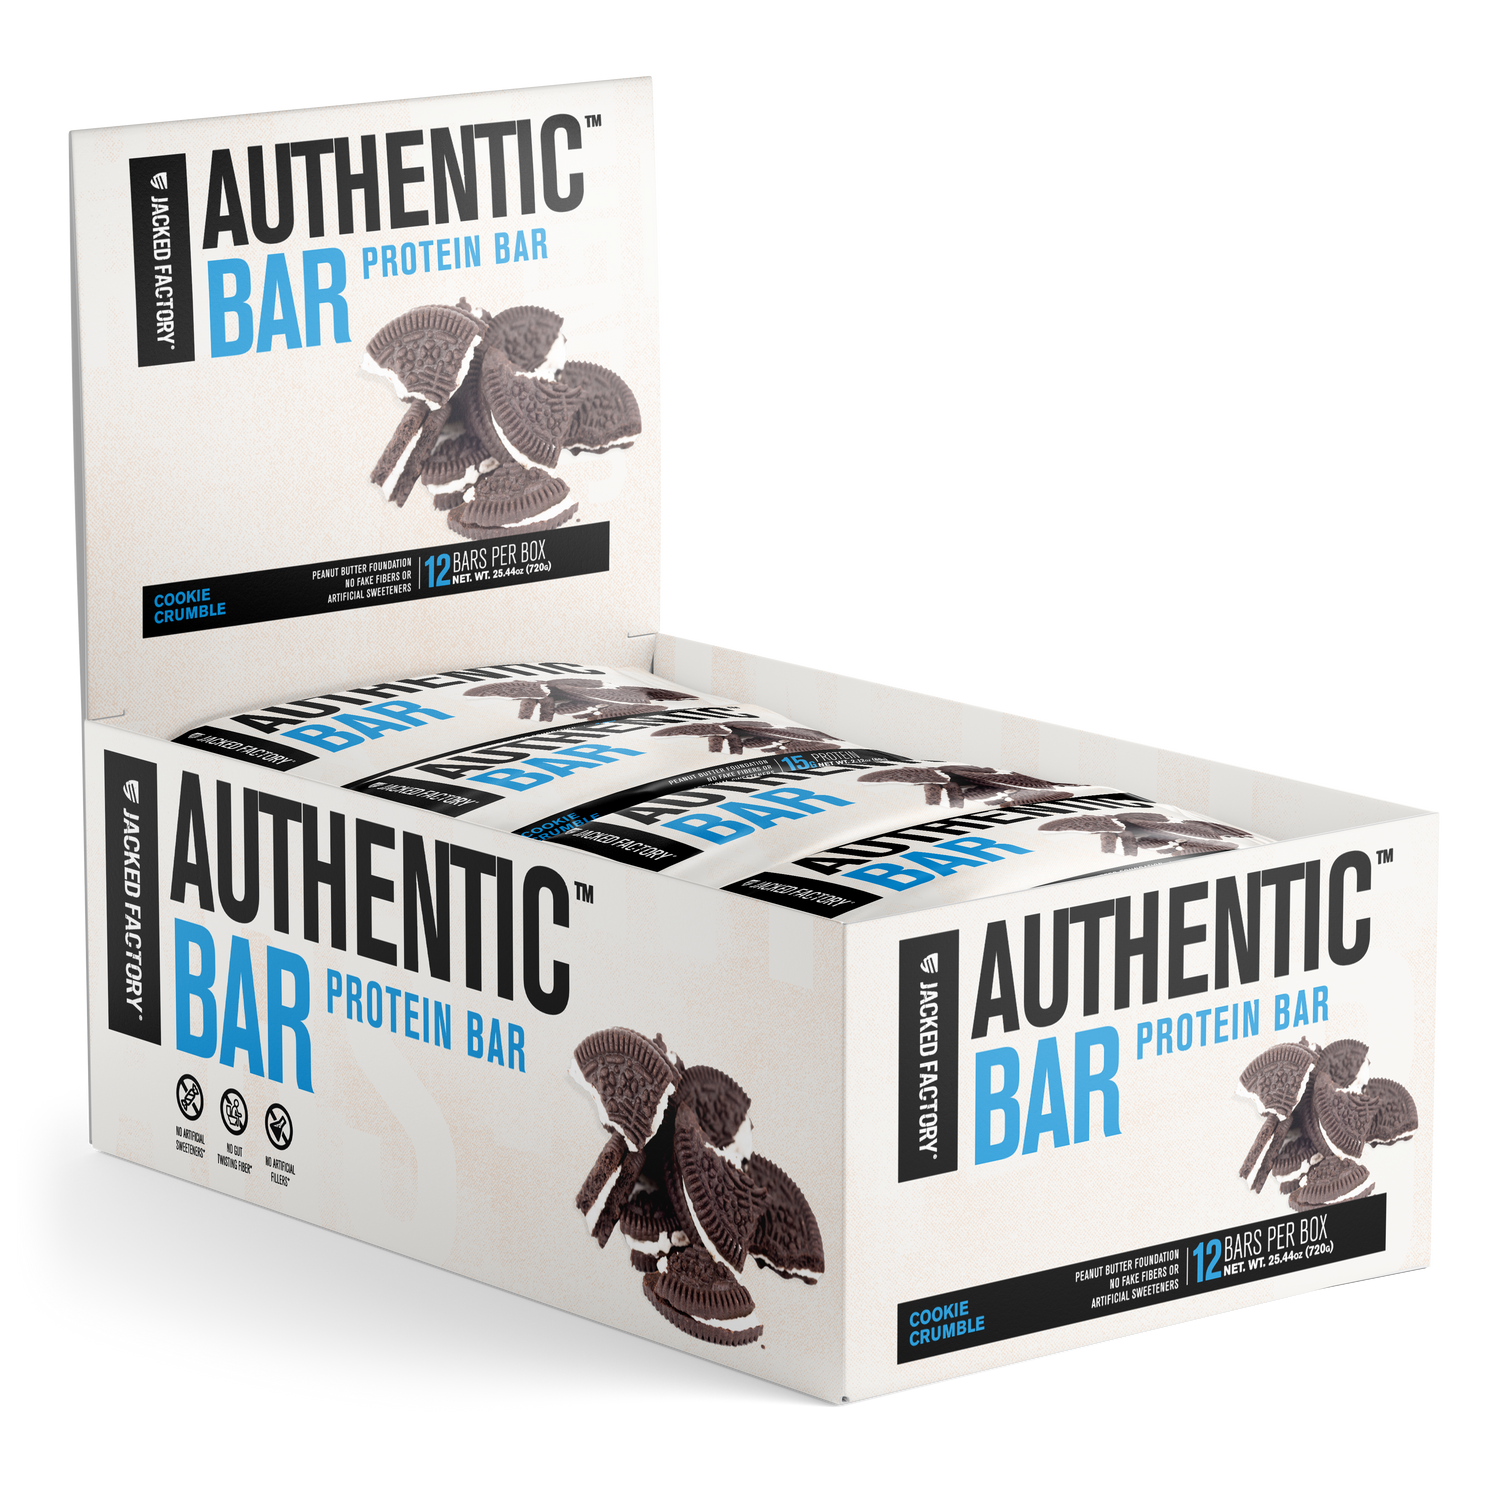 Jacked Factory's 12-pack of Cookie Crumble Authentic Bars in a blue and cream colored box with a chocolate & cream cookie image